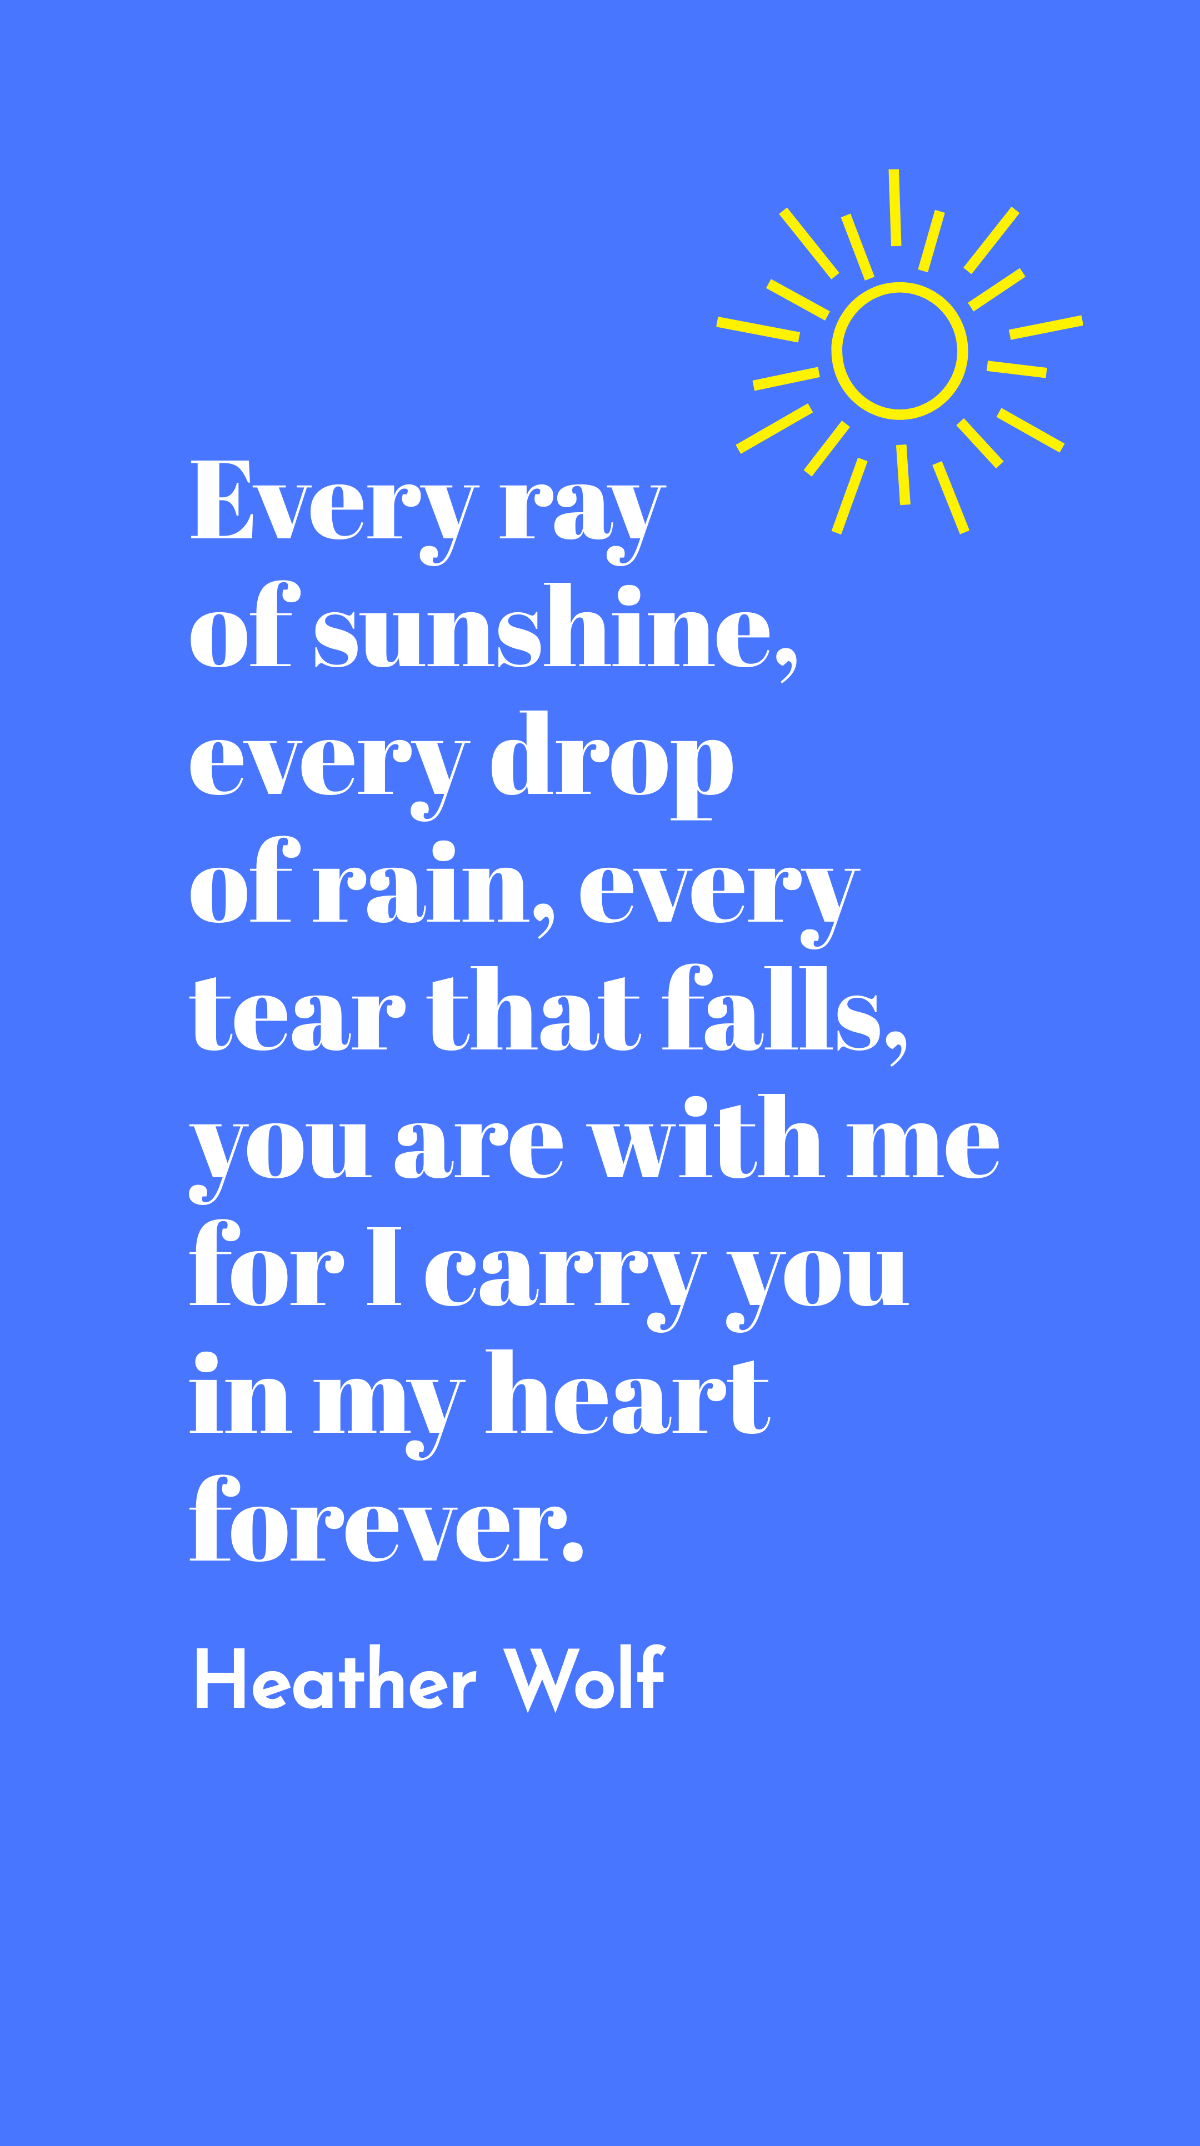 Heather Wolf - Every ray of sunshine, every drop of rain, every tear that falls, you are with me for I carry you in my heart forever.